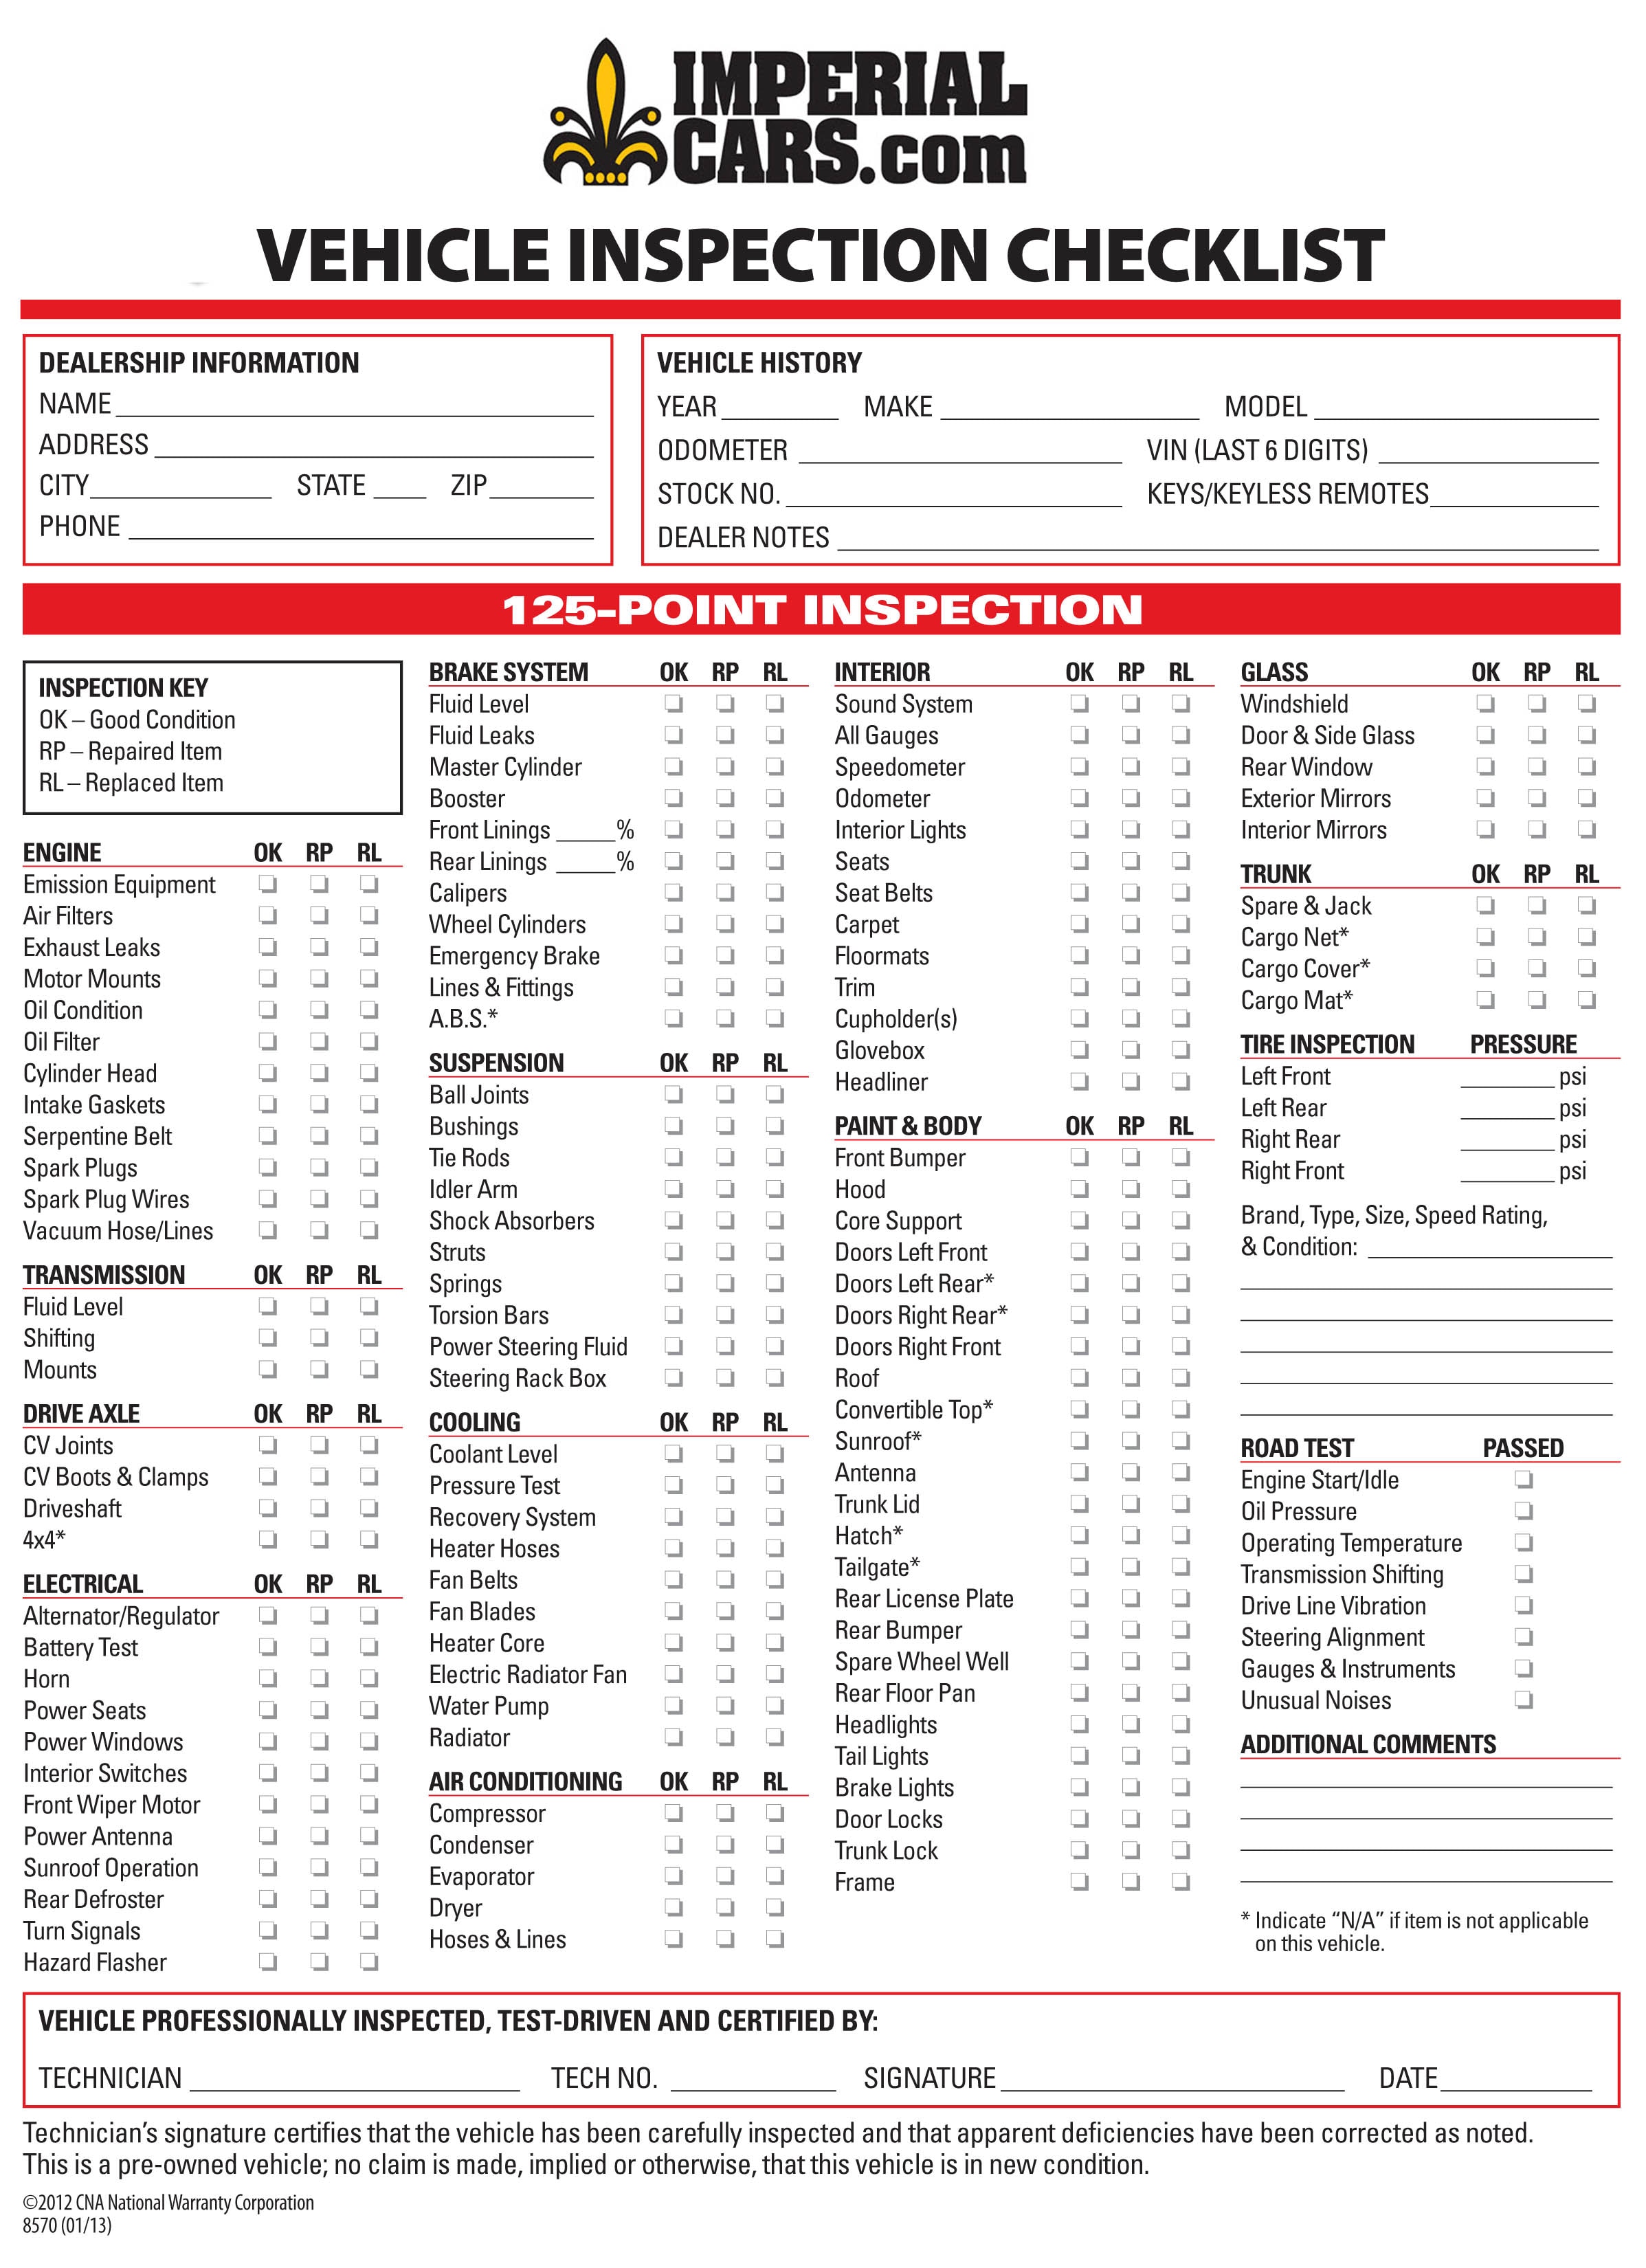 Imperial Cars 125-Point Vehicle Inspection Checklist for All ...